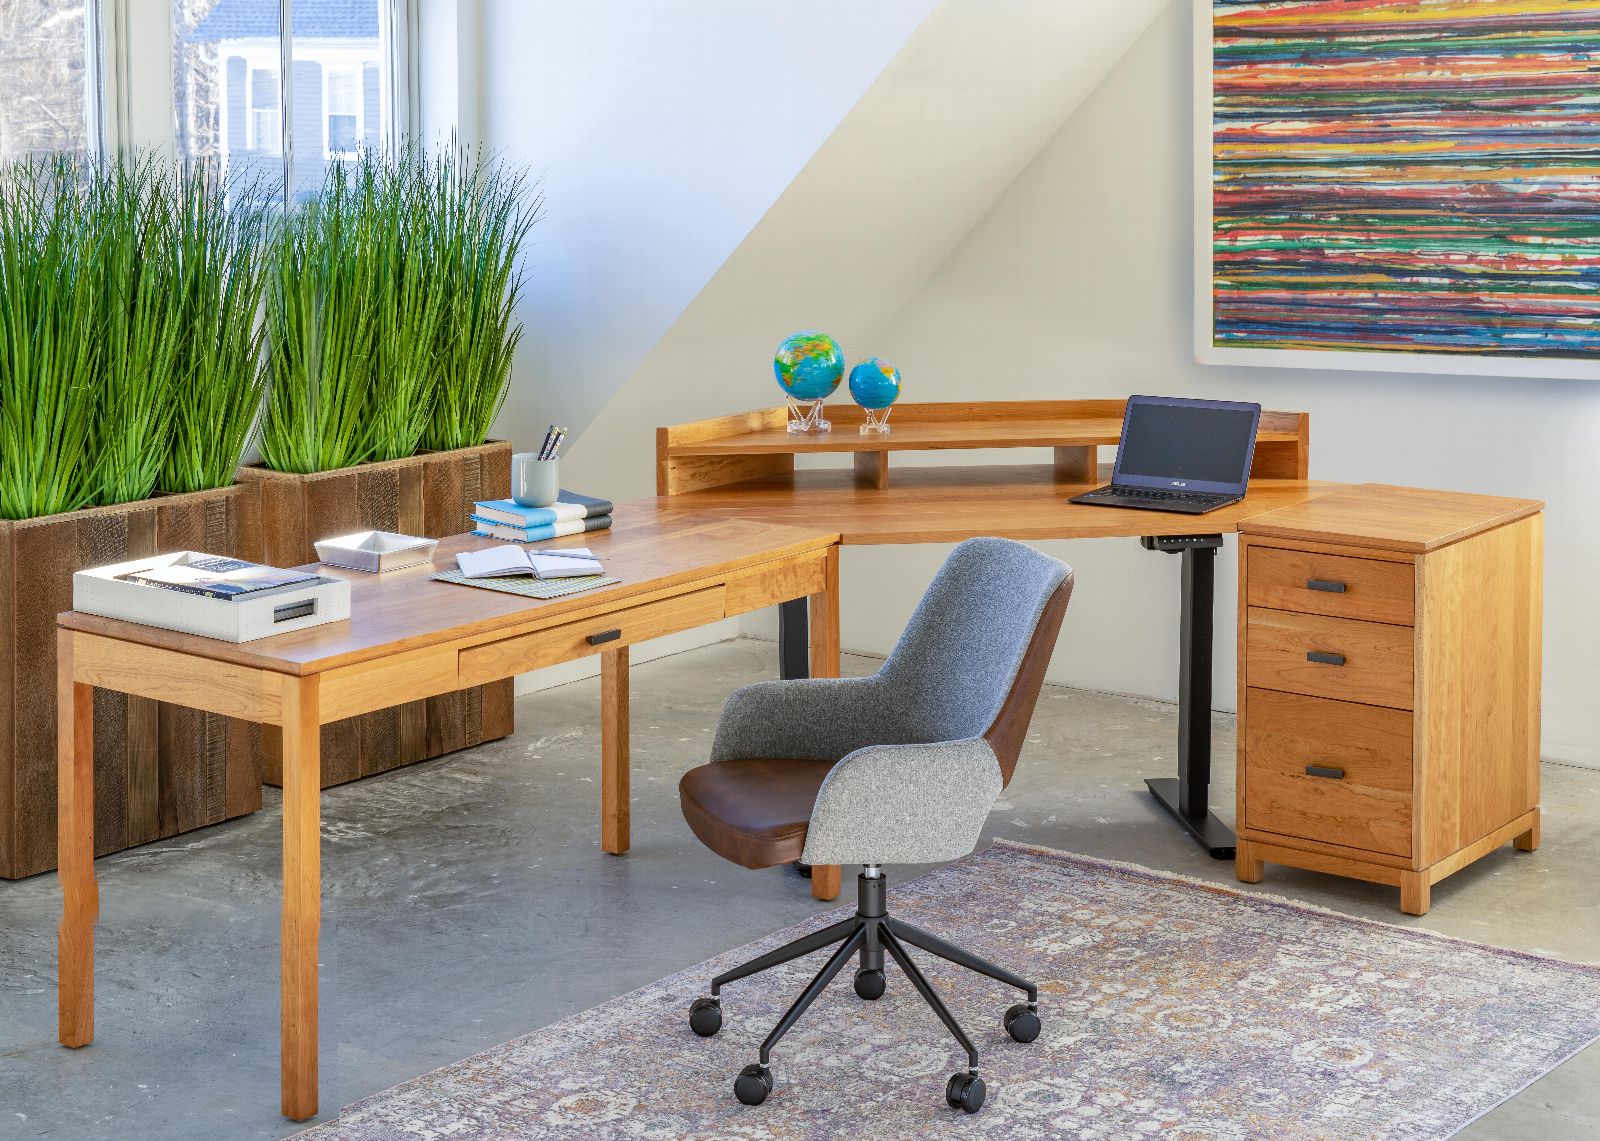 modern wooden desk in front of window with greenery 